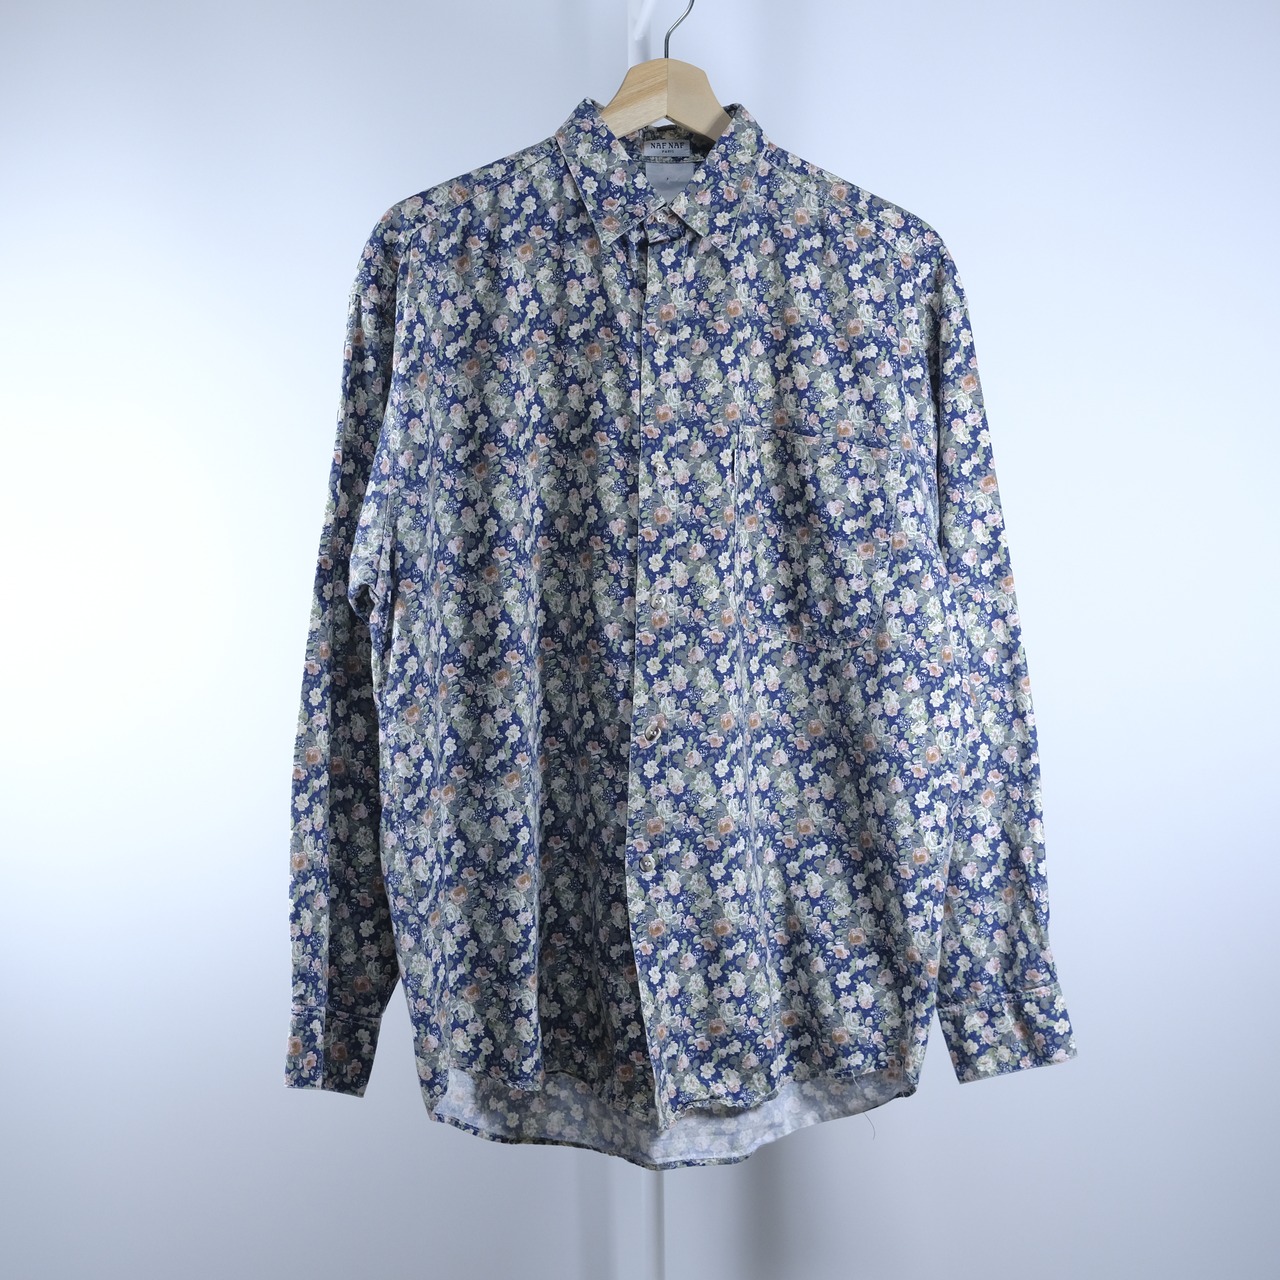 Flower Patterned Shirts